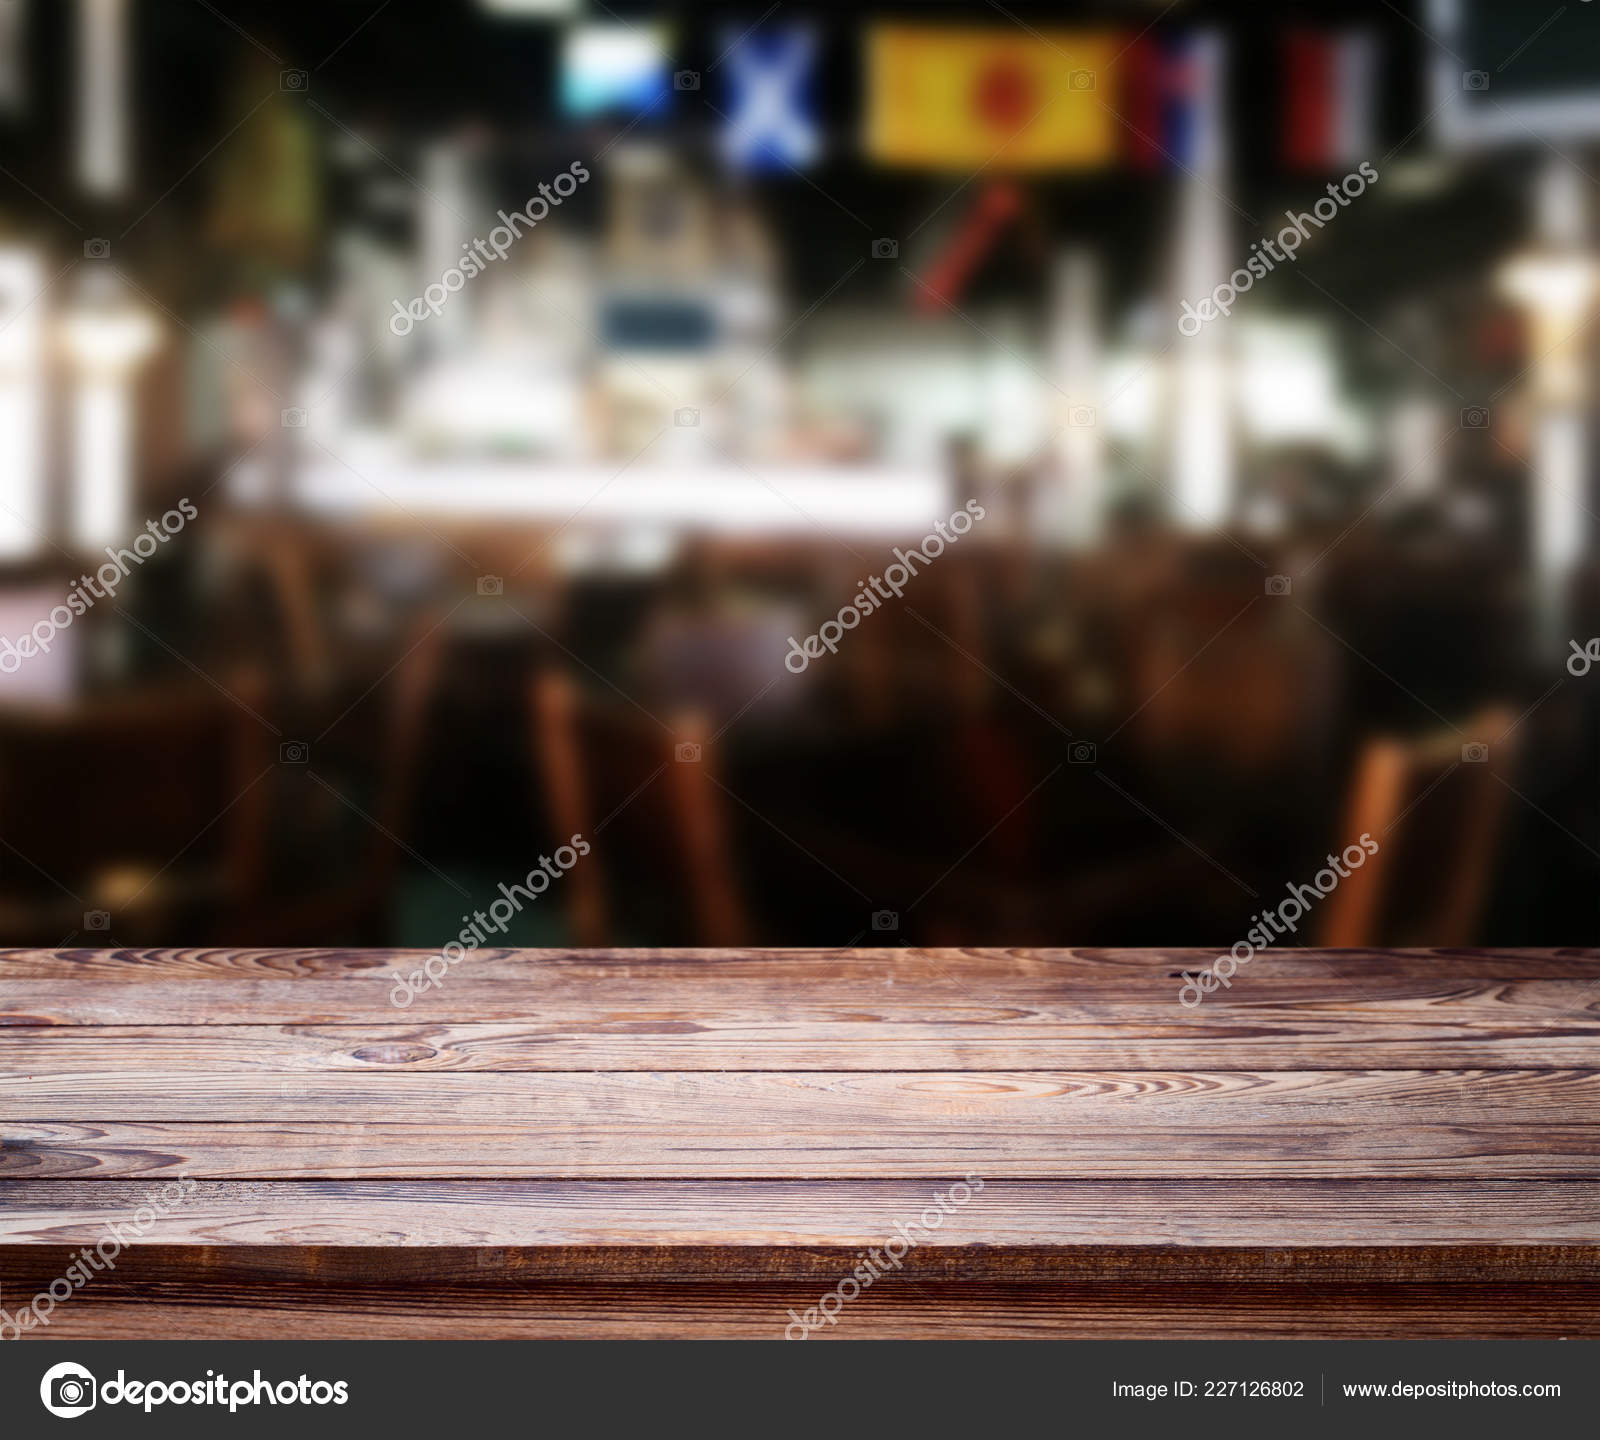 Wooden Table Blured Background Cafe Your Photo Montage Product Display  Stock Photo by ©victoreus 227126802